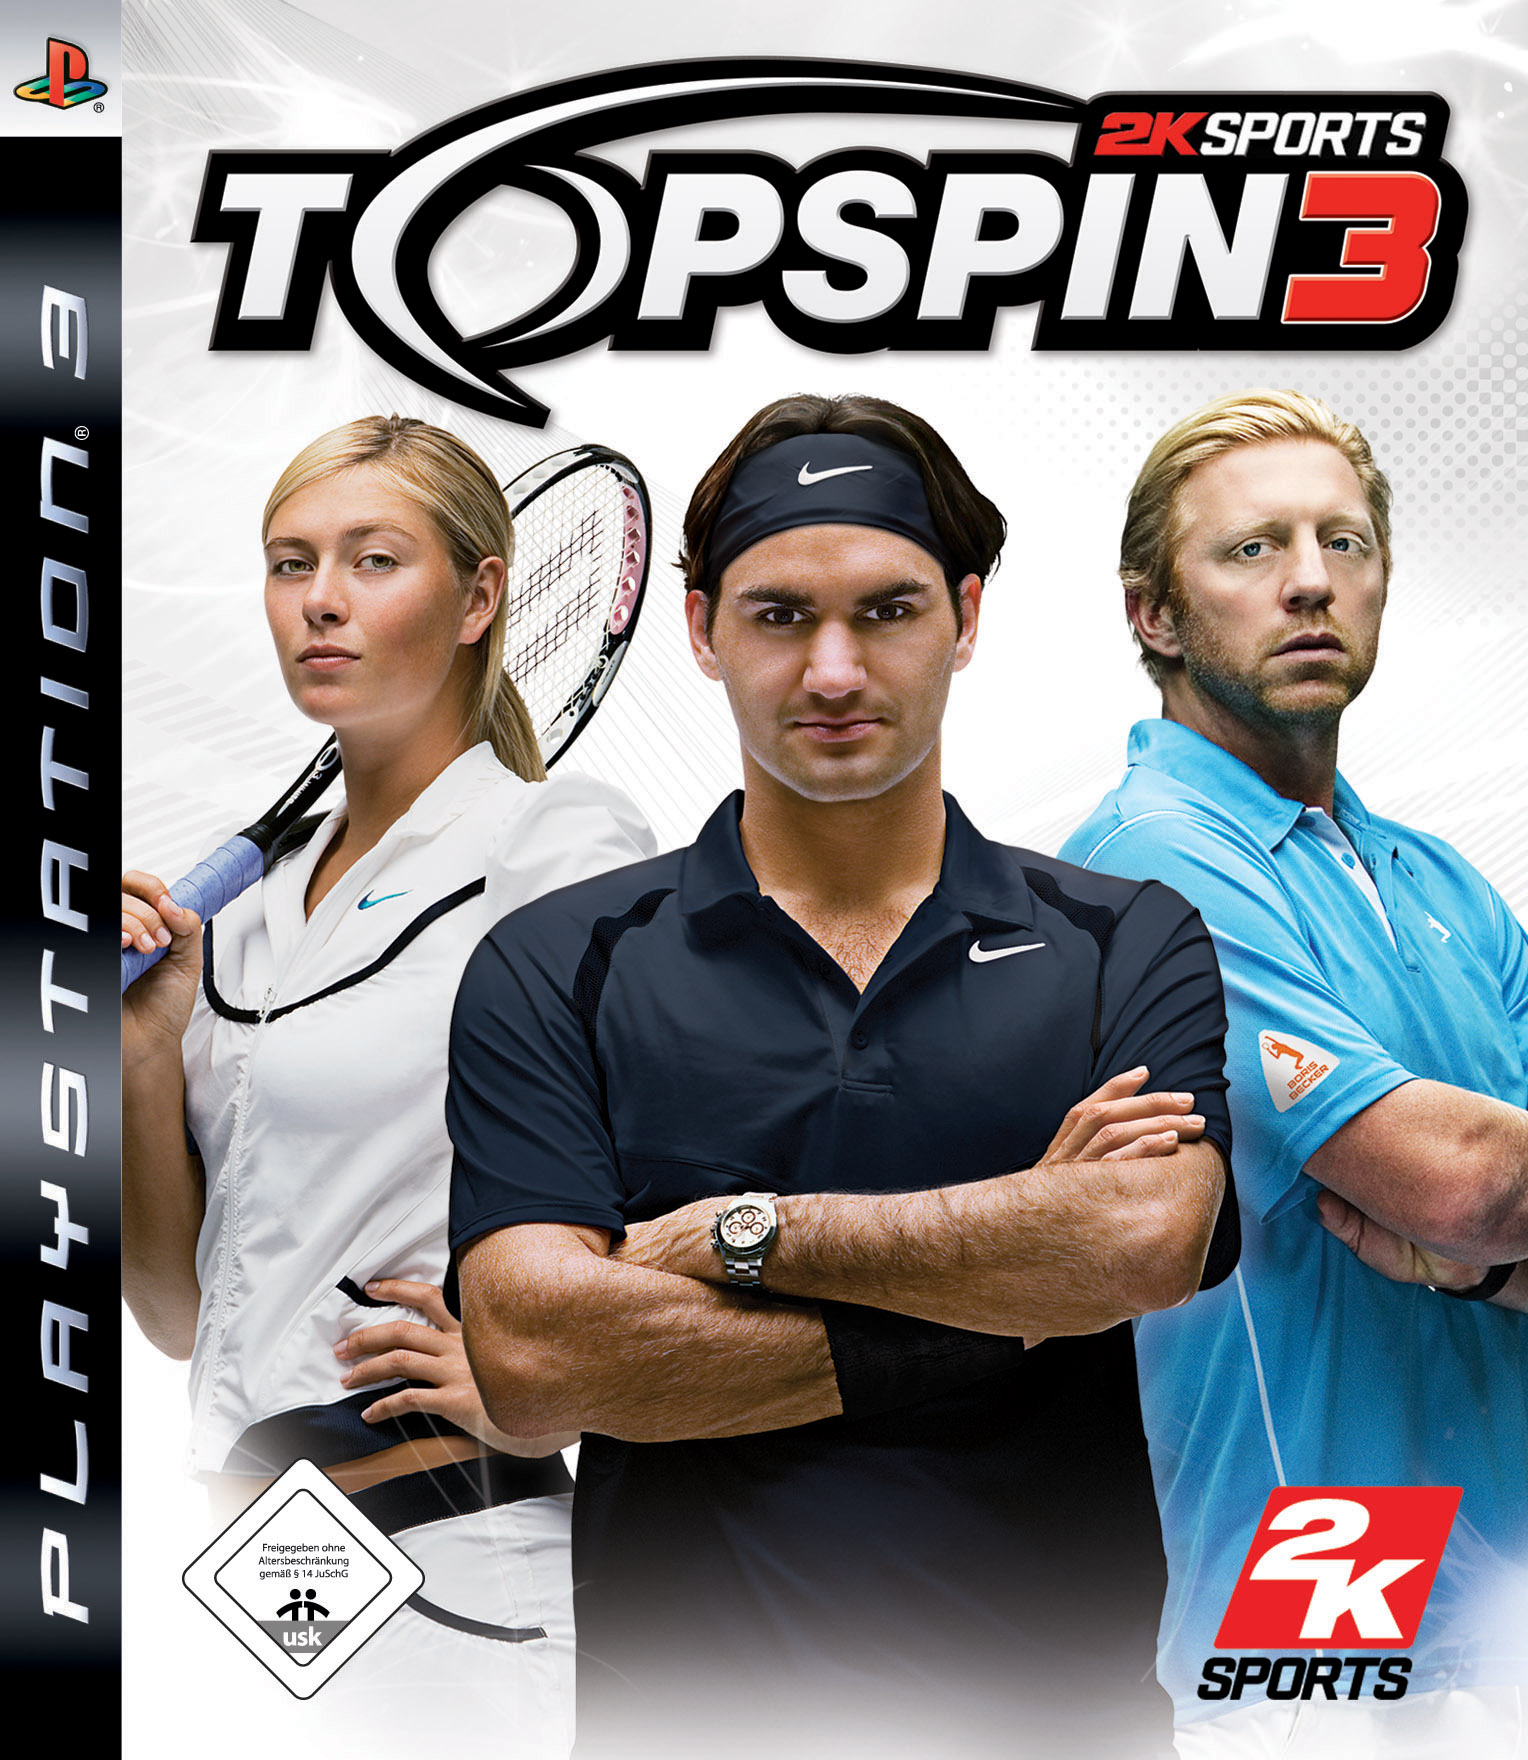 Spin 1 3. Top Spin. Topspin 2011. Top Spin Fresh Ride.